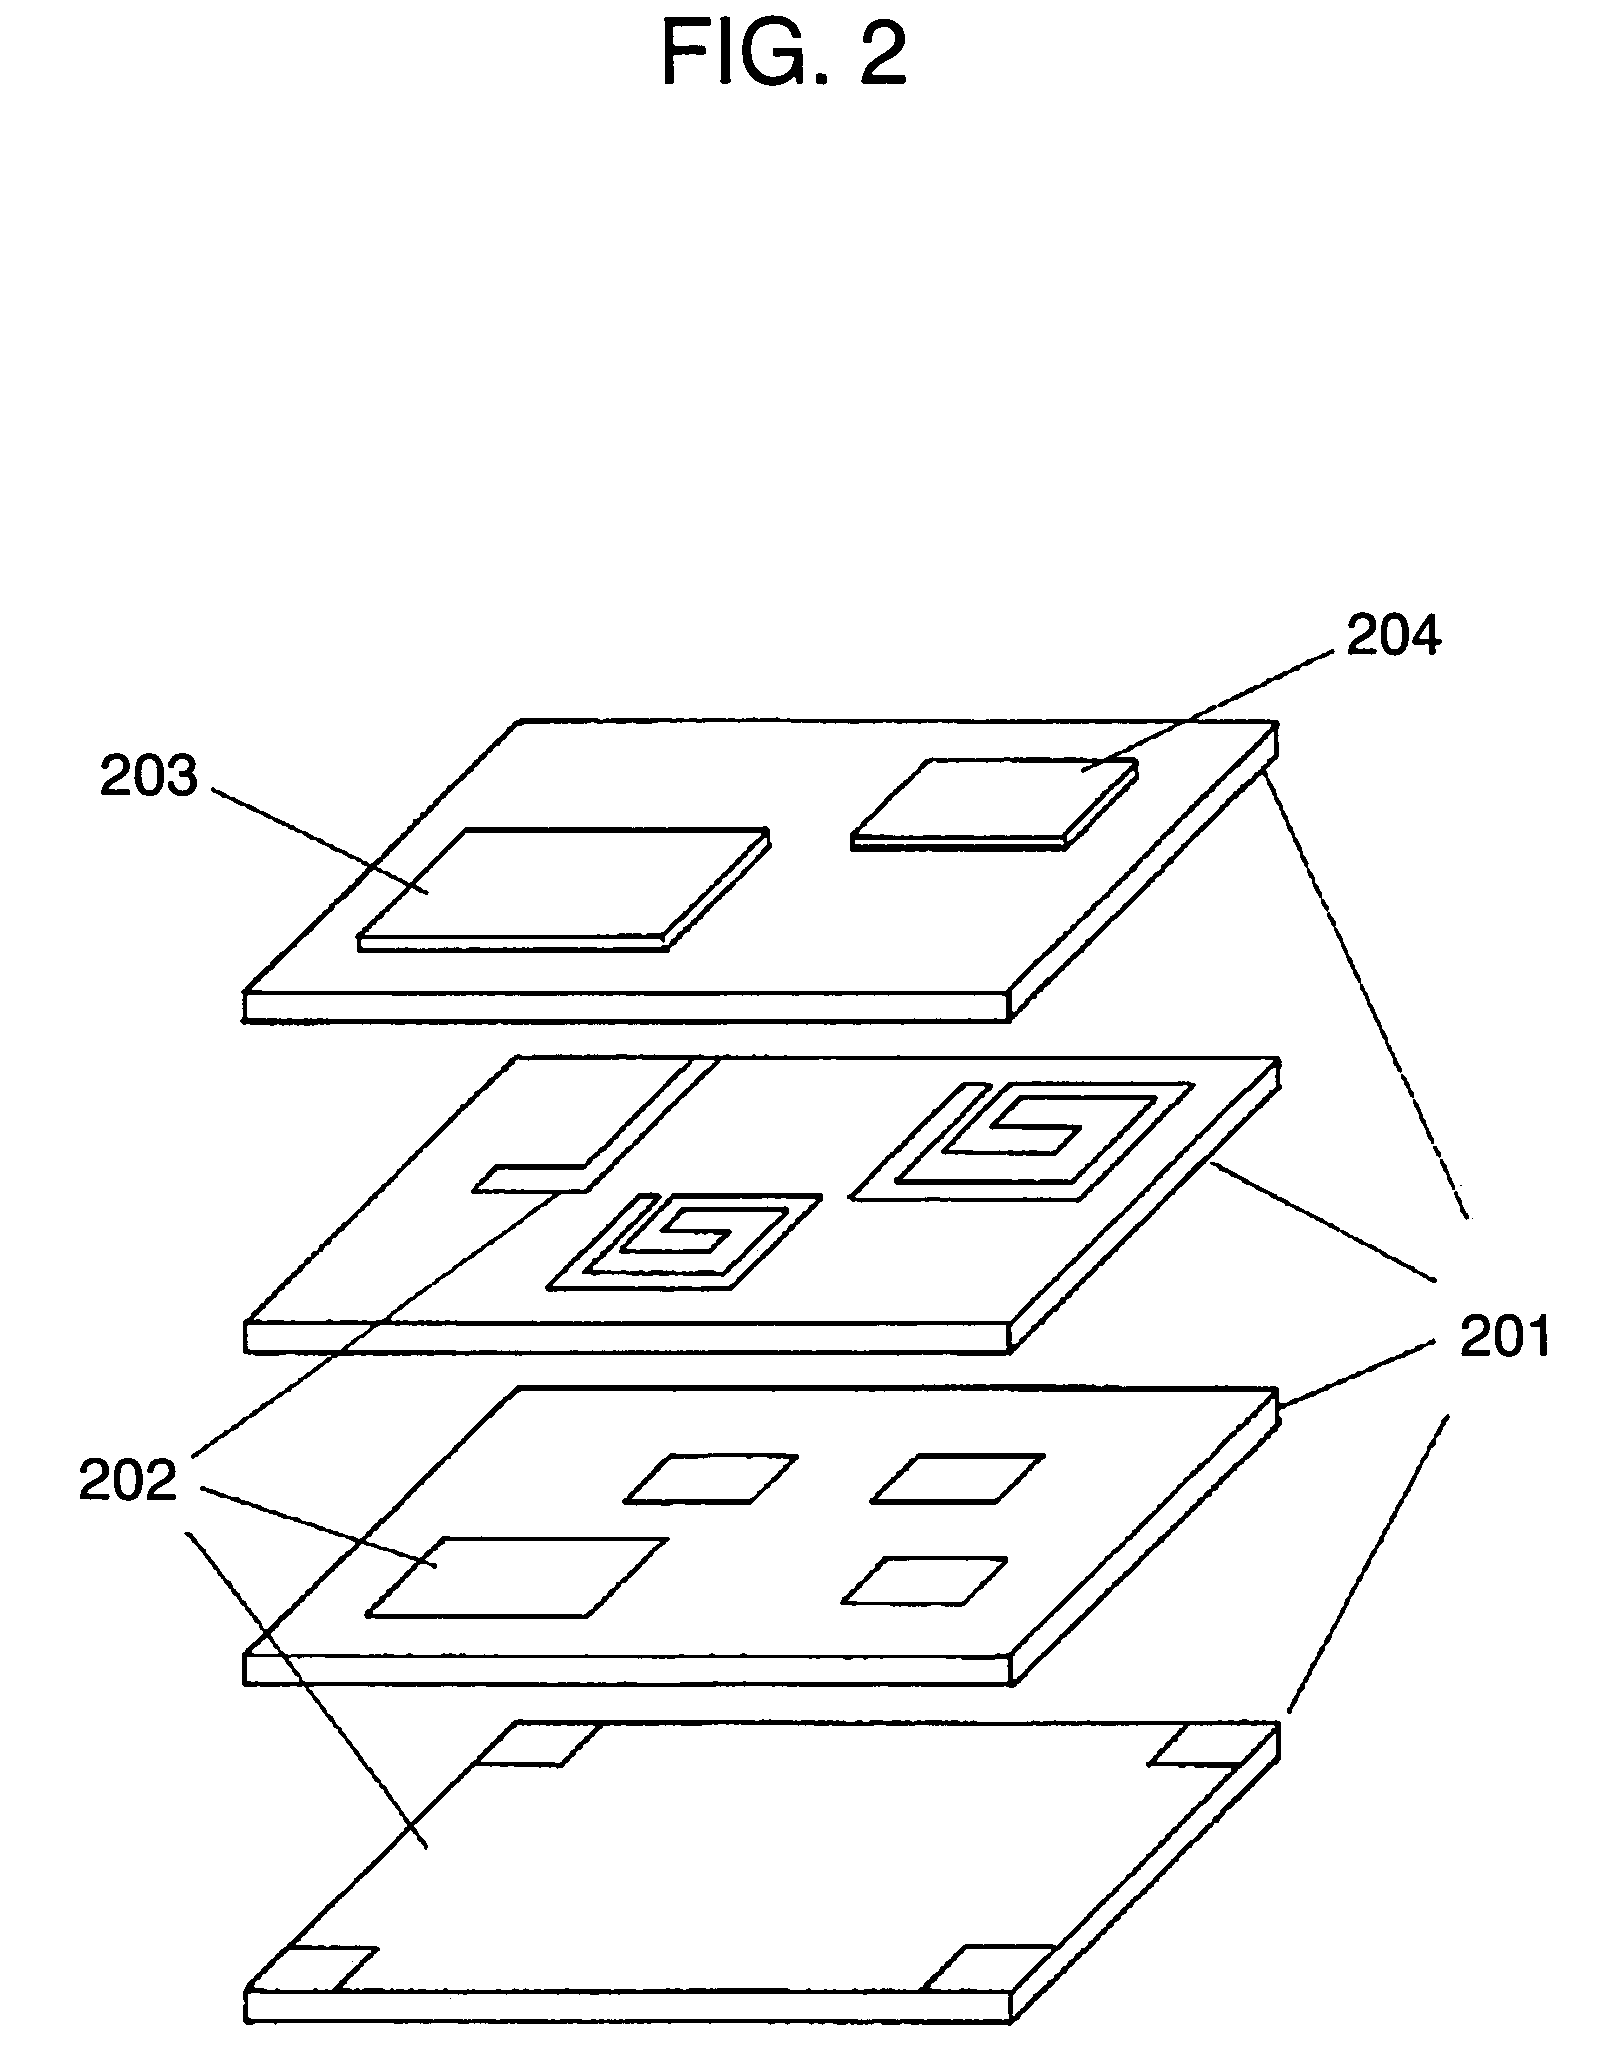 High-frequency composite switch module and mobile communication device using the same